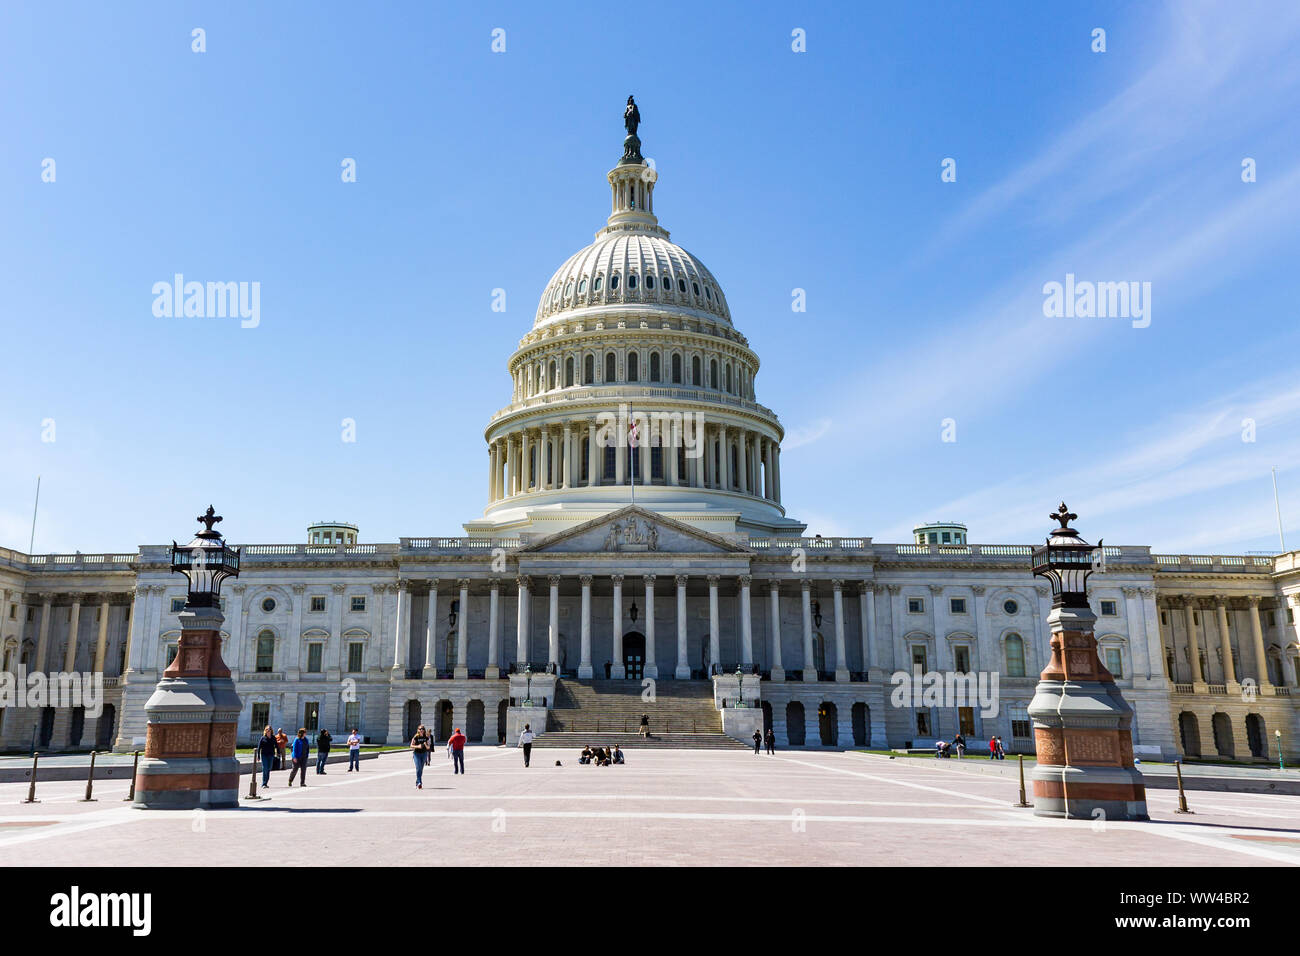 People visit the East Front of the U.S. Capitol building.  The Capitol Building is the home of the U.S. Congress. Stock Photo